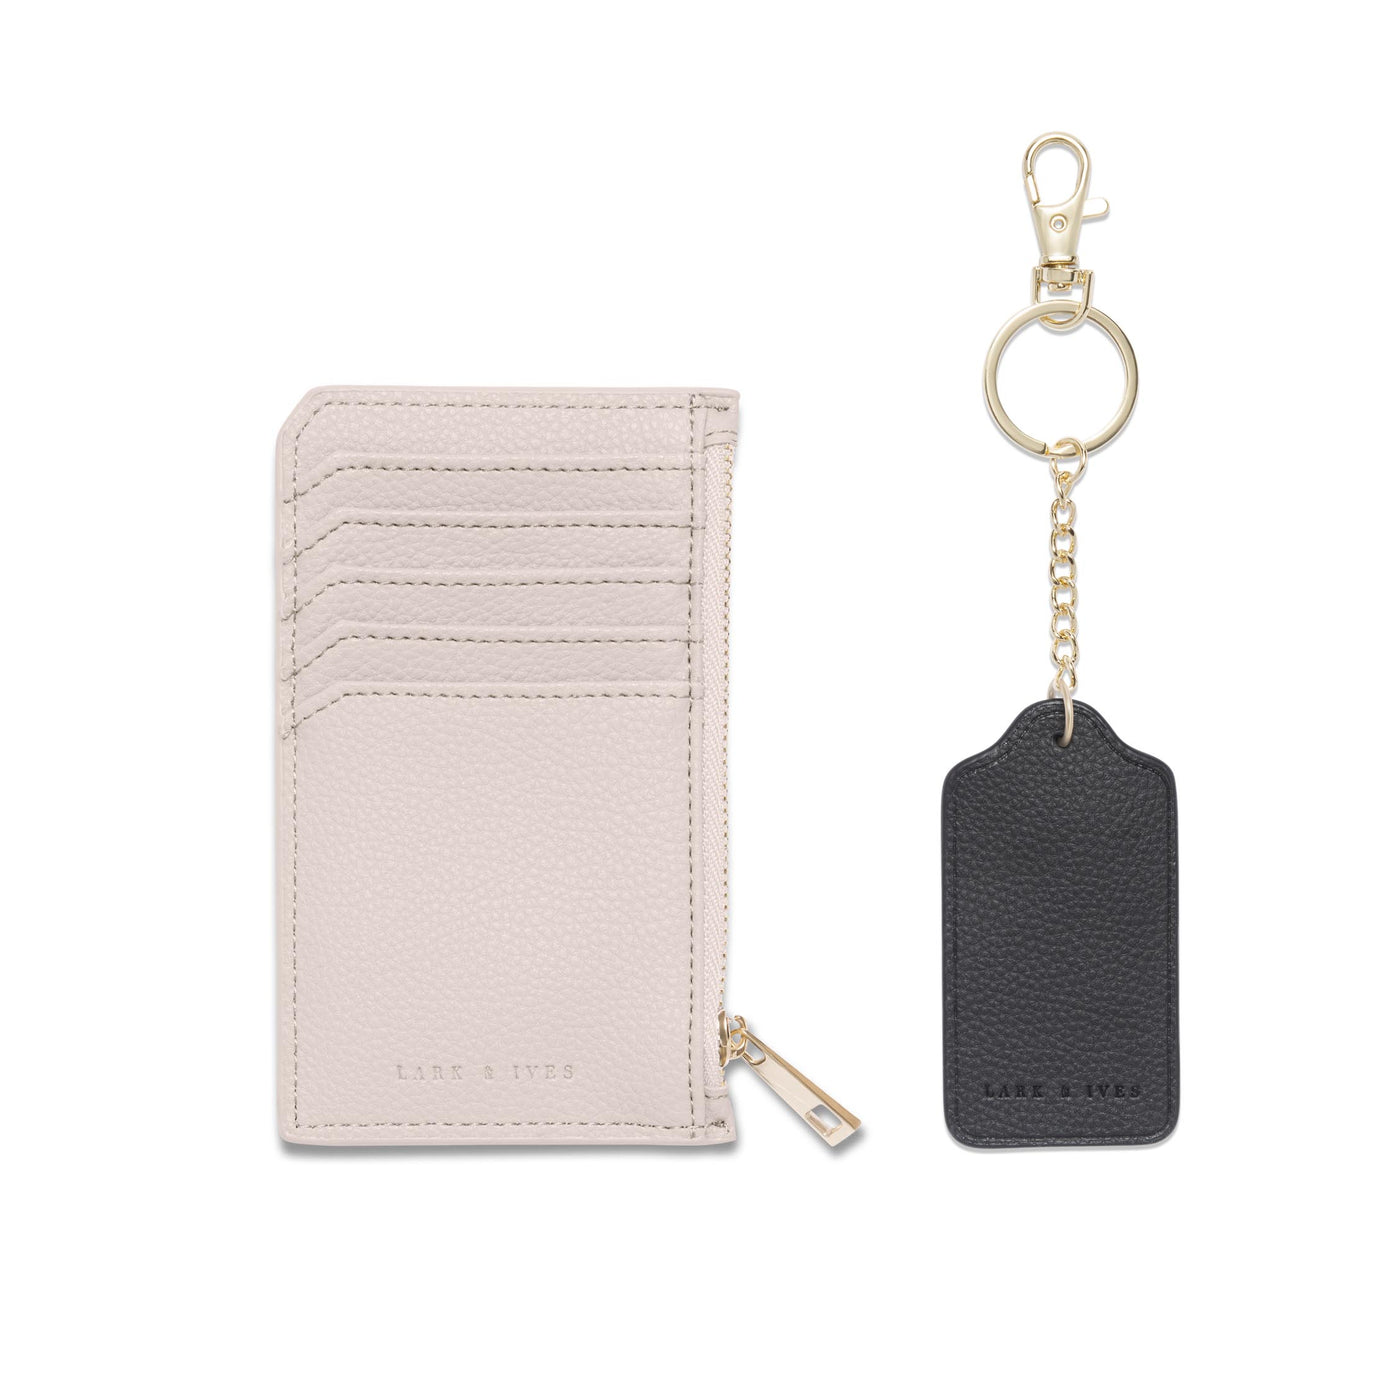 Lark and Ives / Vegan Leather Accessories / Small Accessories / Wallet / Mini Wallet / Card Case / Card Holder / Zippered Wallet / Zipper closure / Keychain / Key ring / Tag Keychain / Beige Holder and Black Keychain